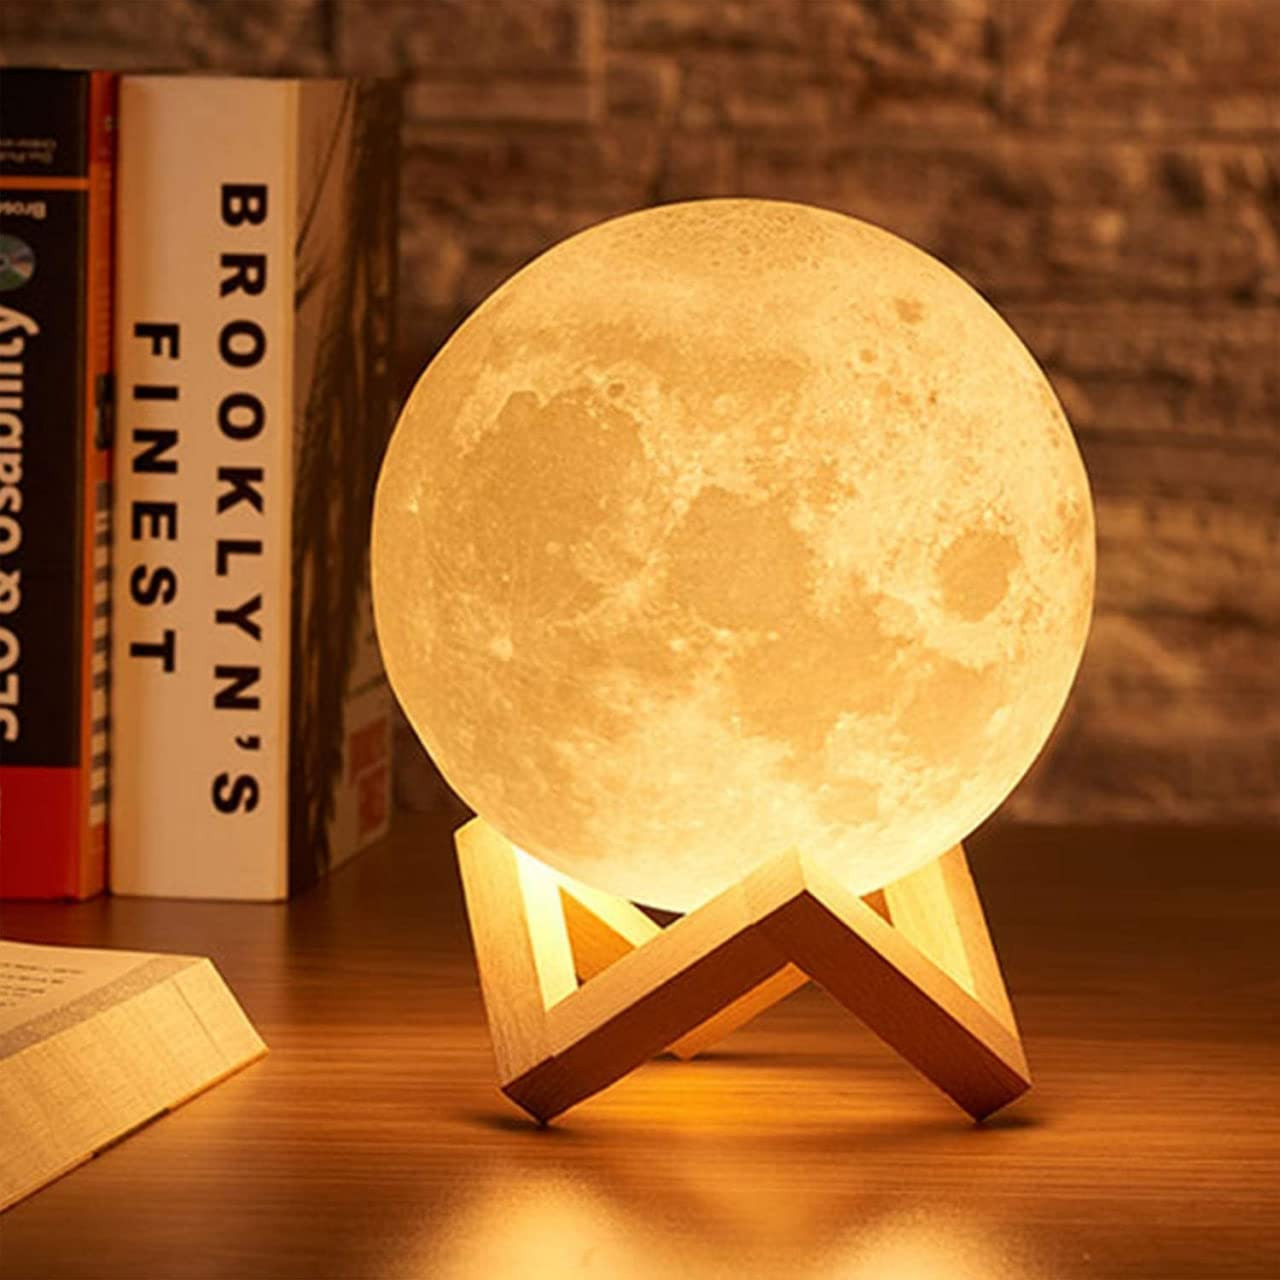 7 Color Changeable 3D Moon Lamp @ ₹ 399 with Stand for Bedroom Lights, Night Rechargeable Lamp 15 cm